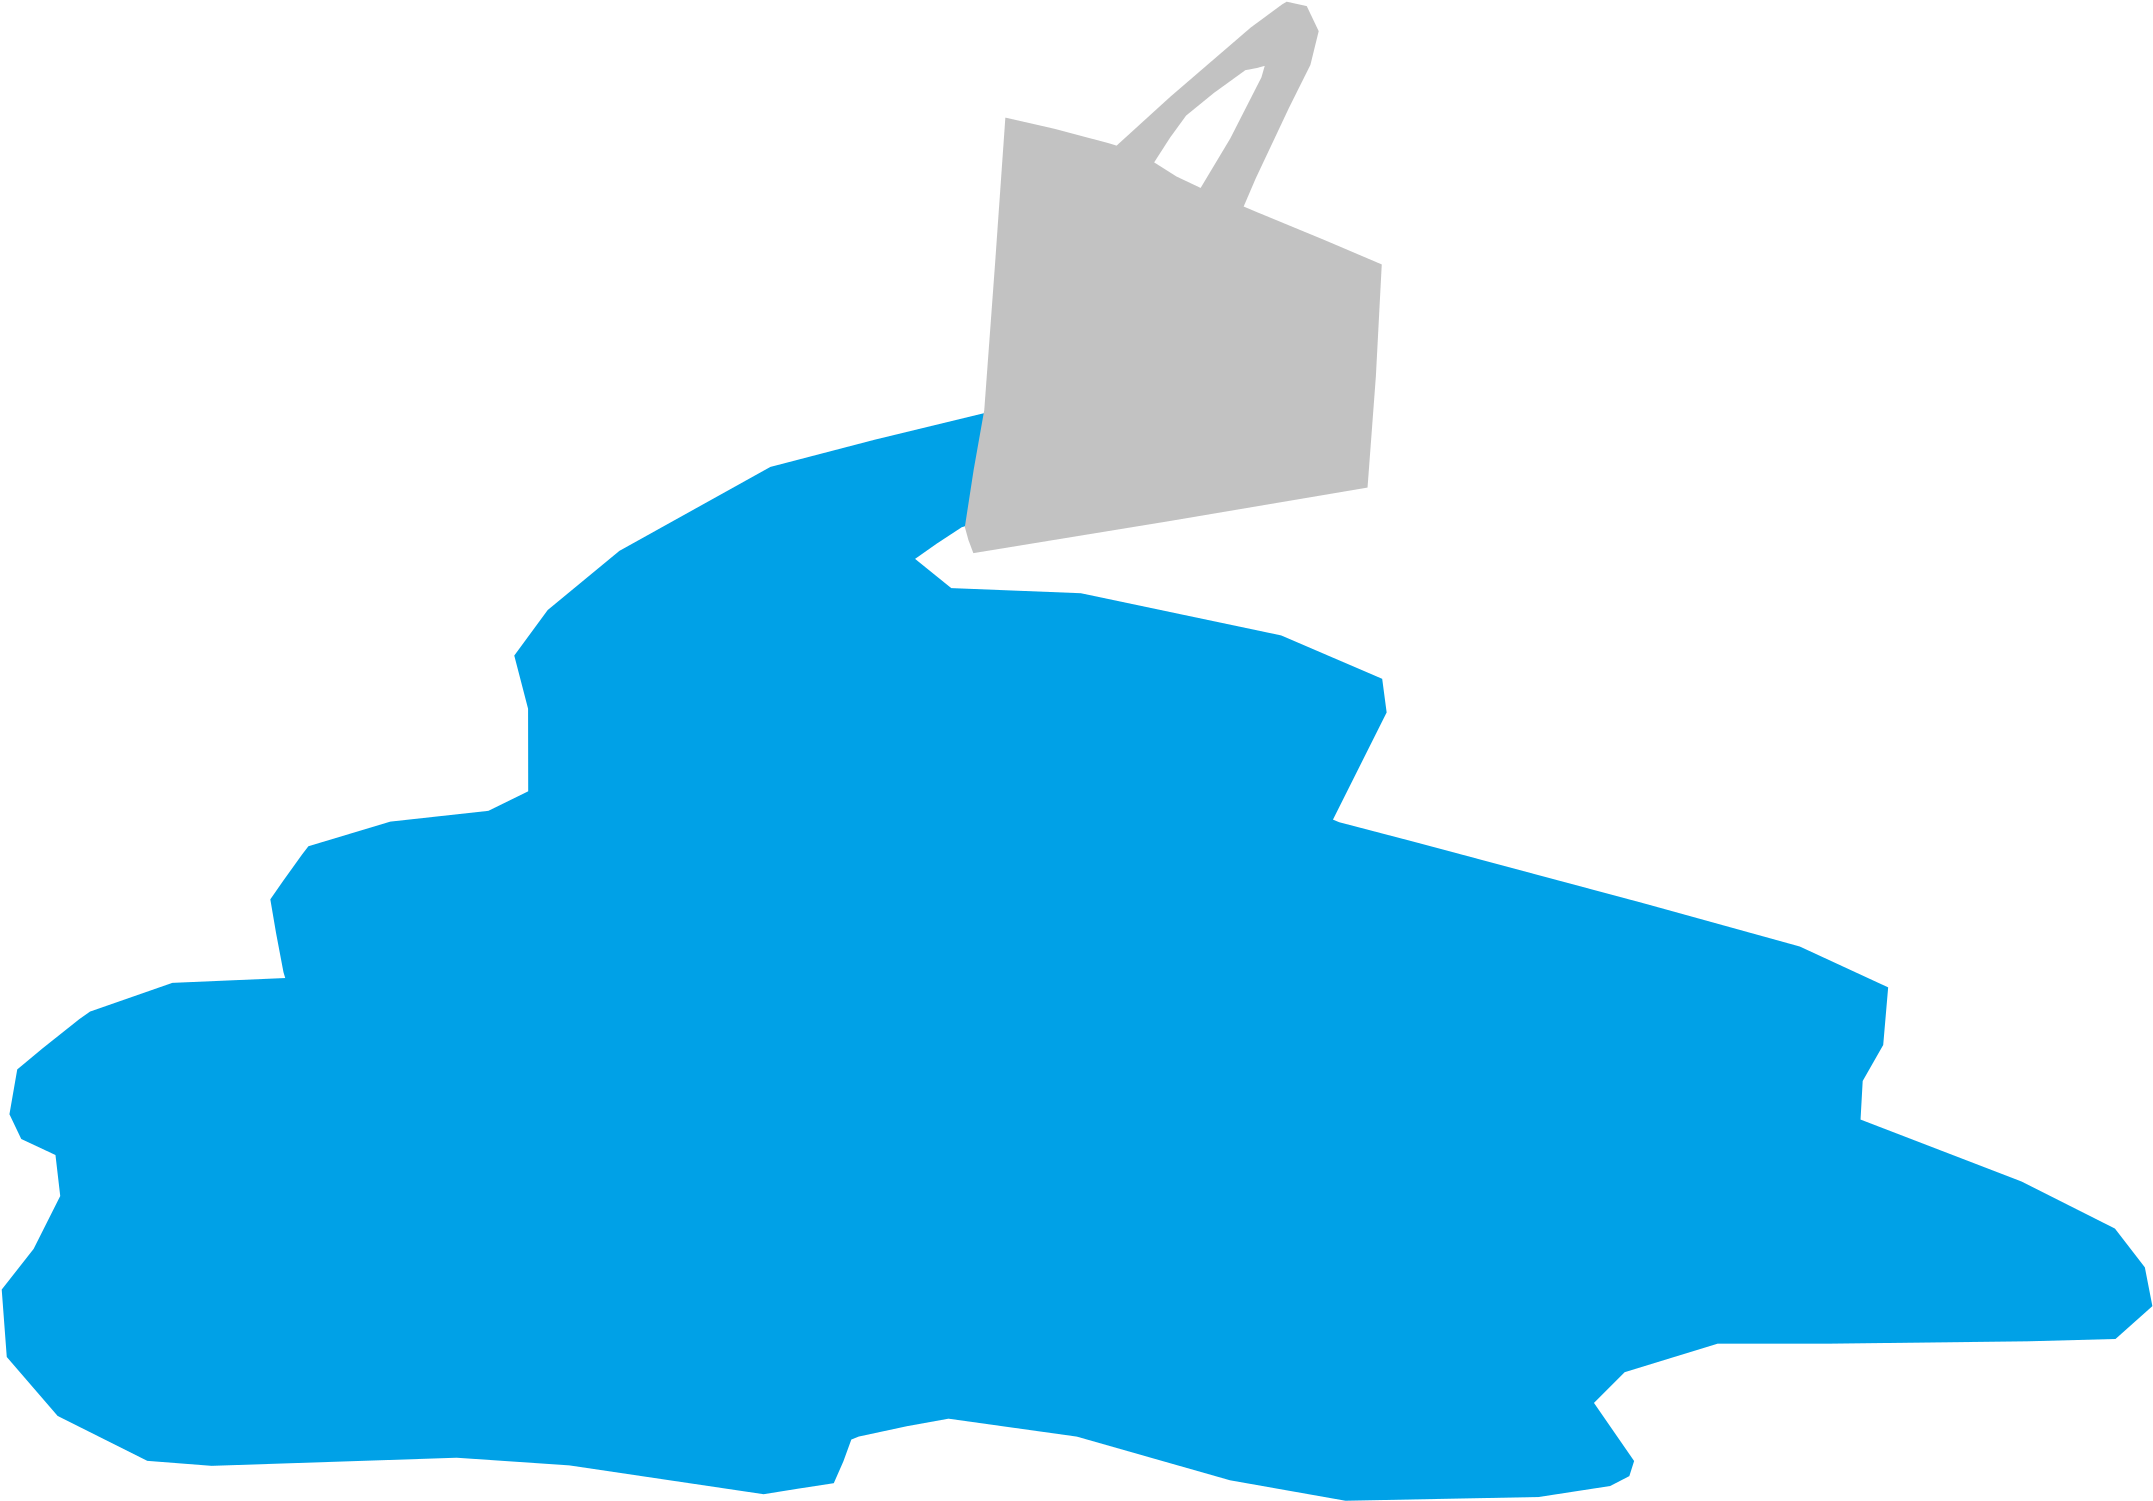 Bucket Of Water Refixed - Water Reservoir .png Icon (2400x1692)